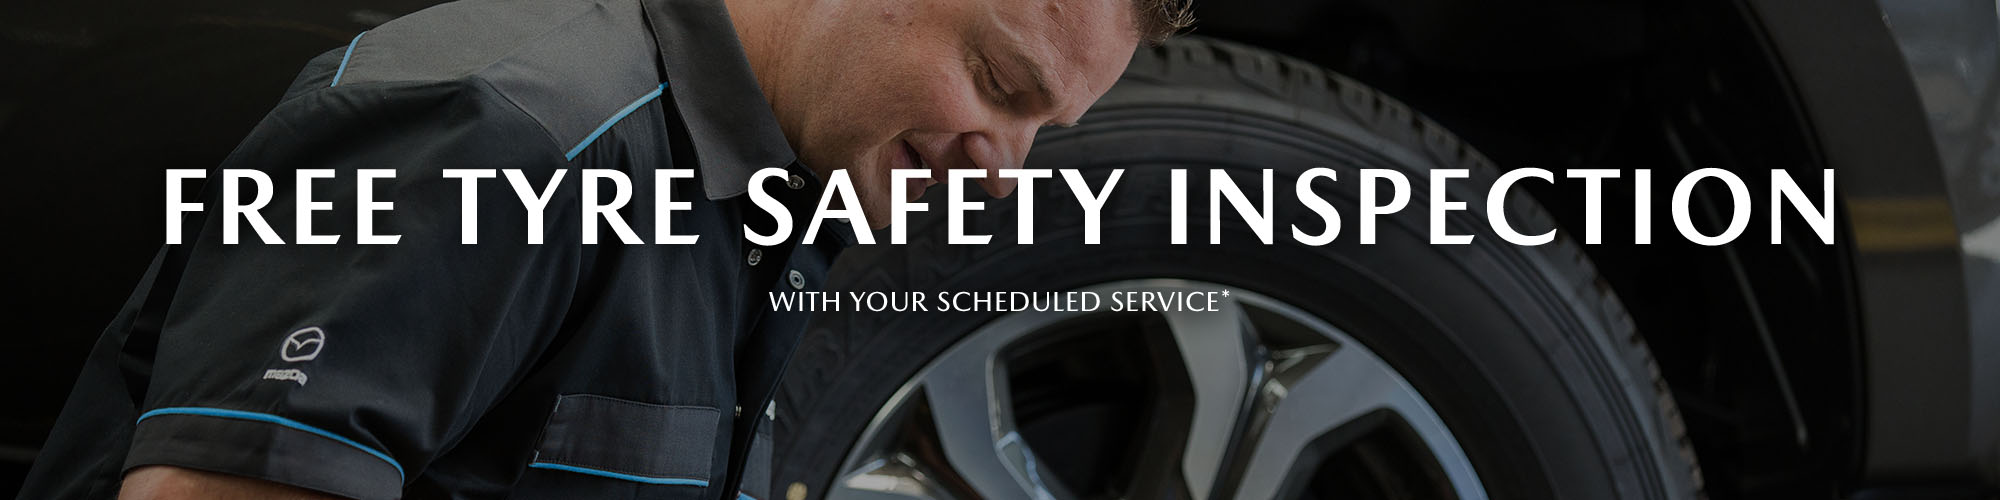 Free Winter Tyre Safety Inspection with your Service